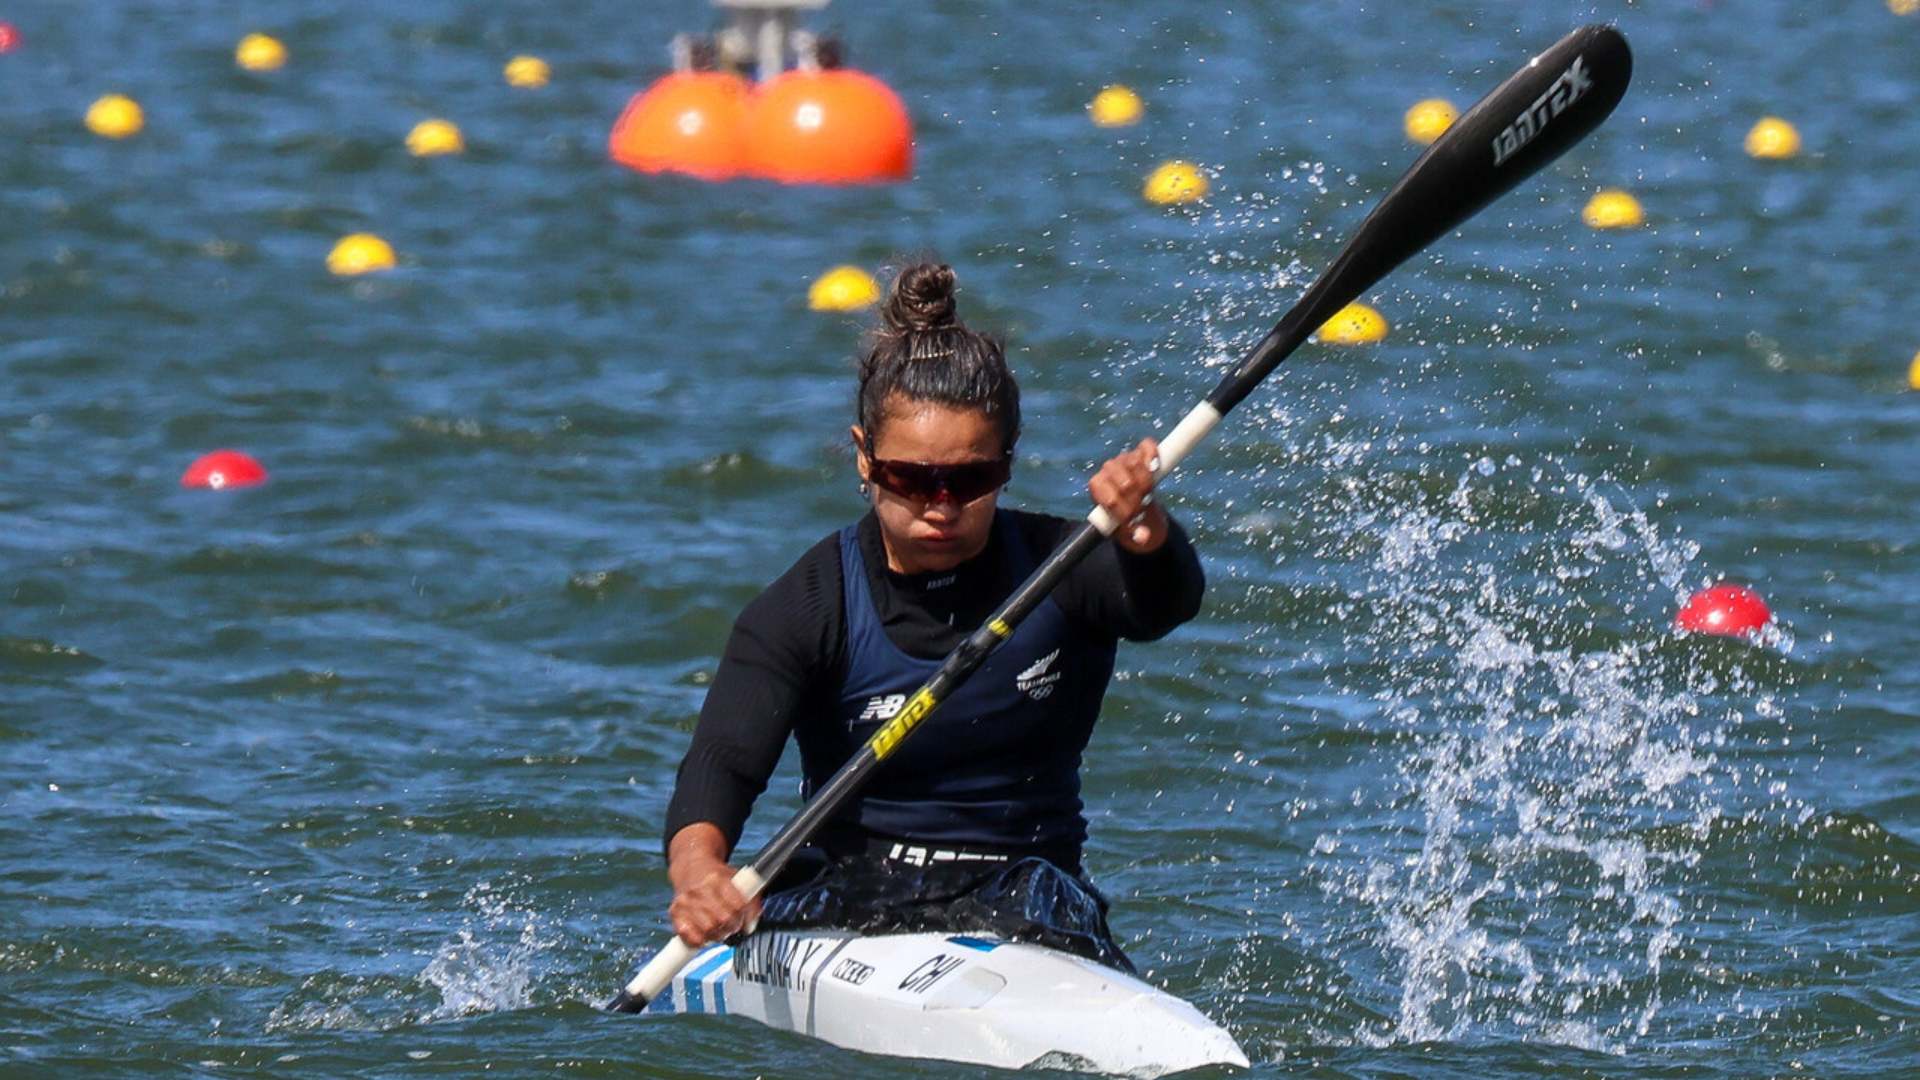 Canoe Sprint: Chile Qualifies for Two New Finals